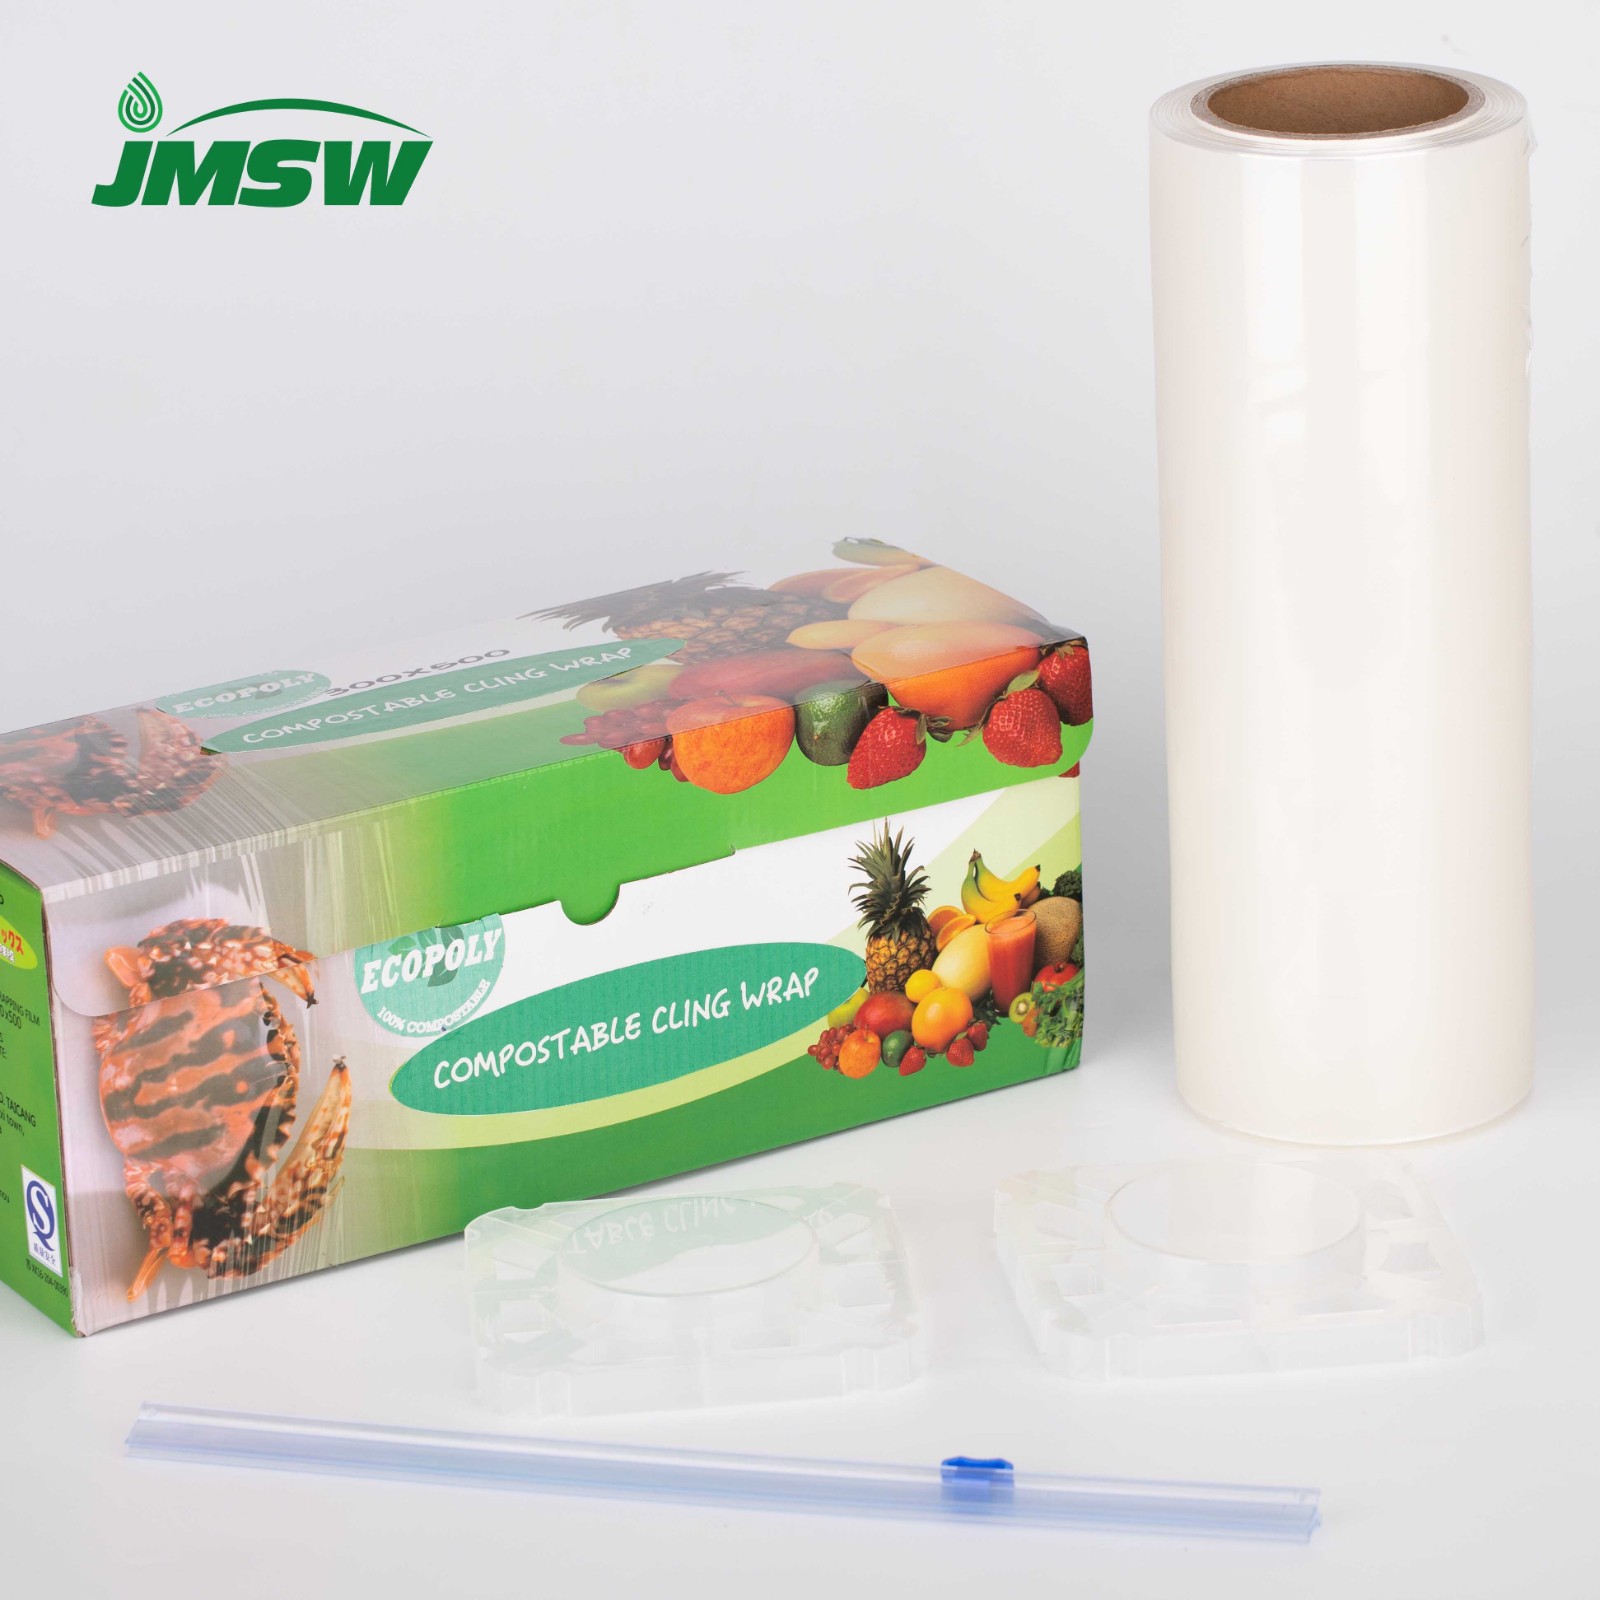 Compostable cling wrap